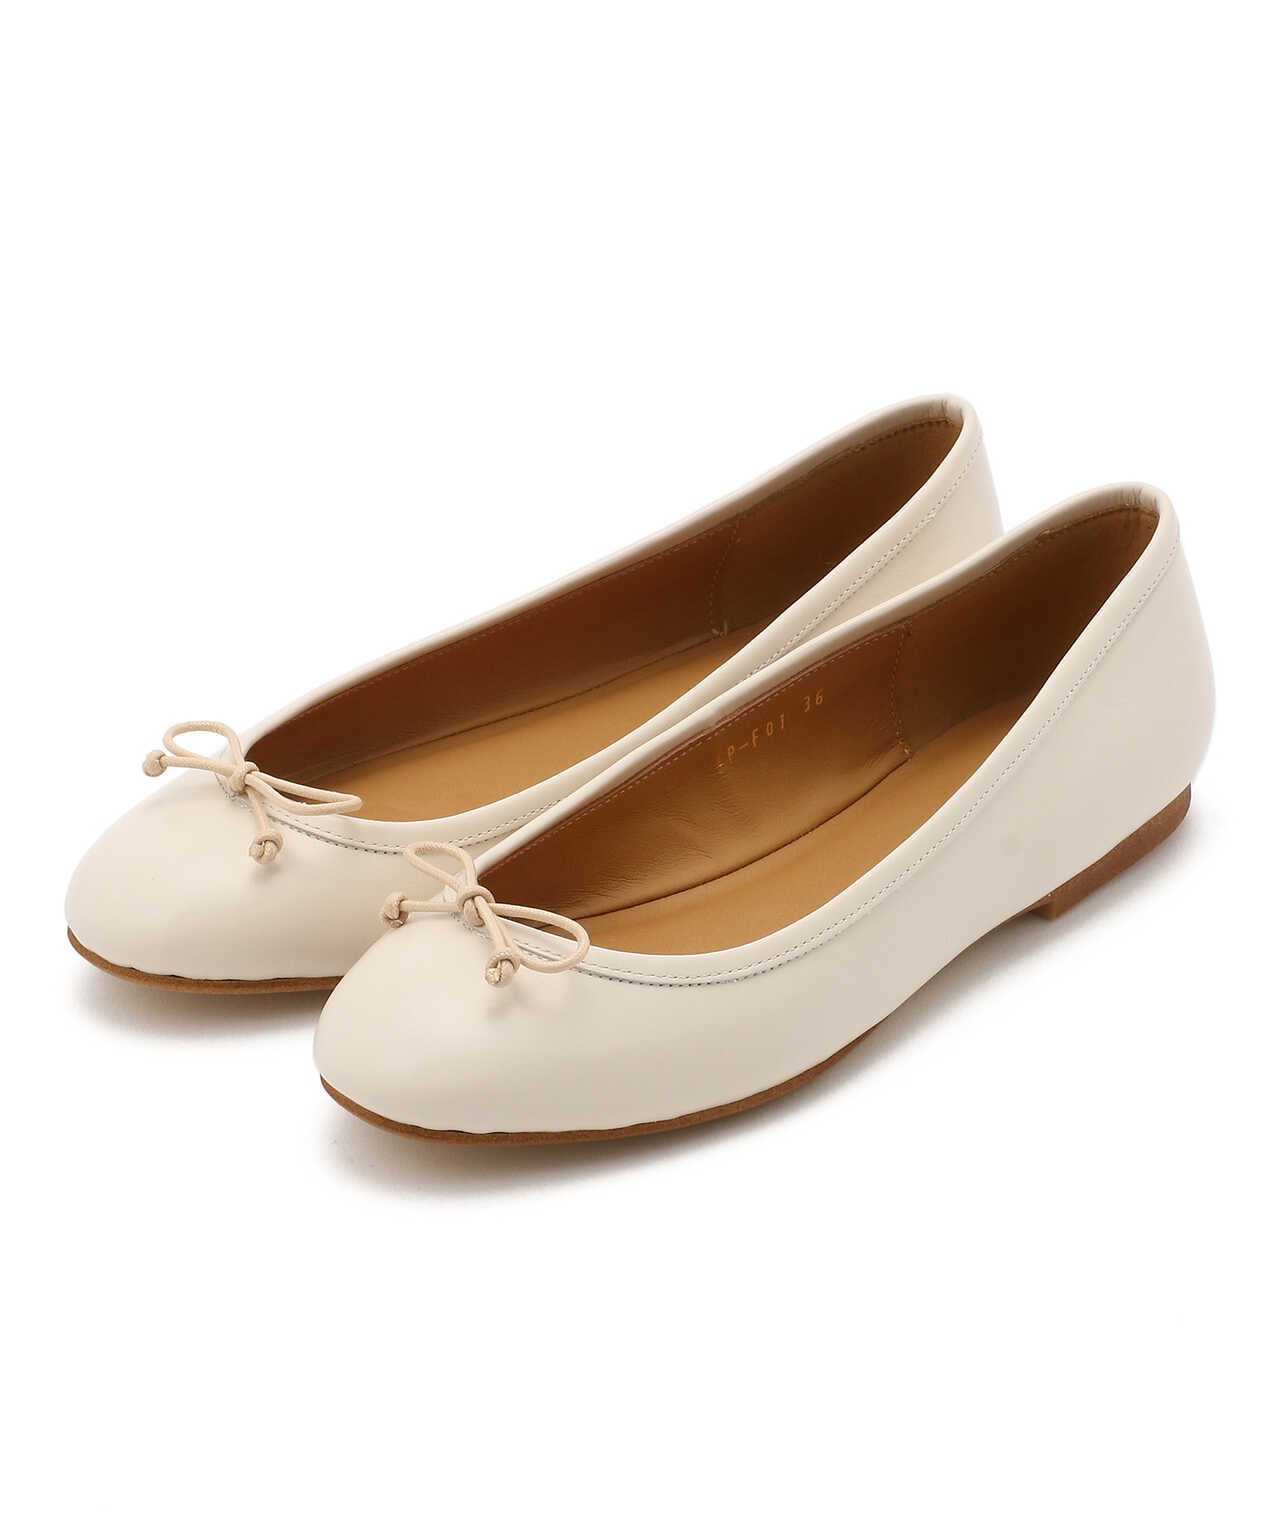 todayful　Round Ballet Shoes　バレエシューズ